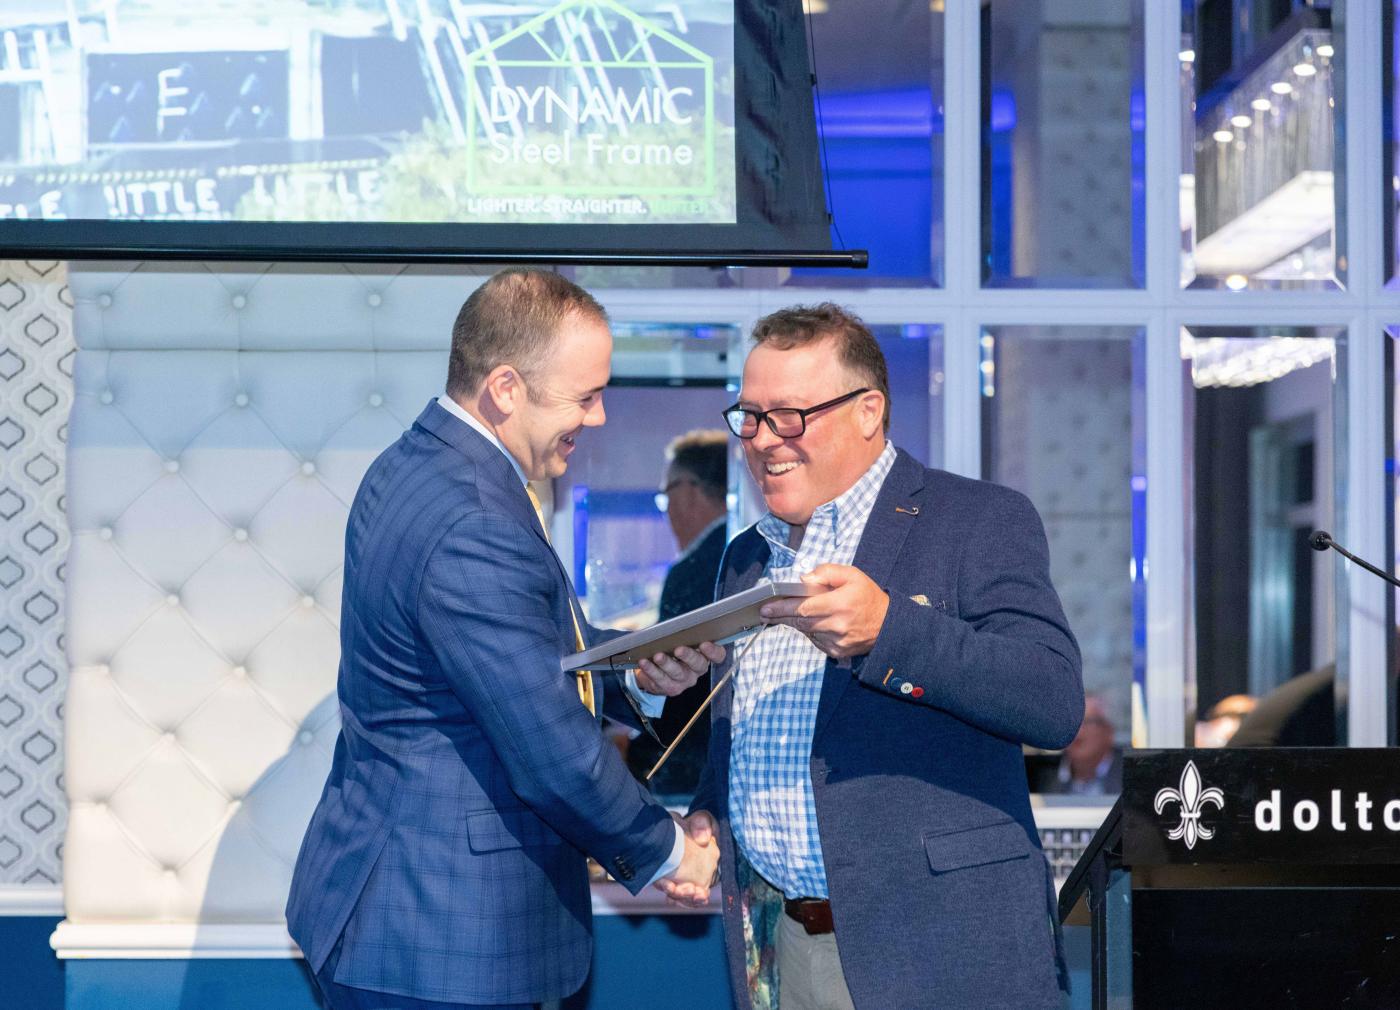 Pictured are the winners of the awards for Innovative Cold Form Steel Buildings. Dynamic Steel Frame, for the Grattan Street Facade. Peter Blythe, Managing Director at Dynamic Steel Frame. With John Shayler, National President, NASH.